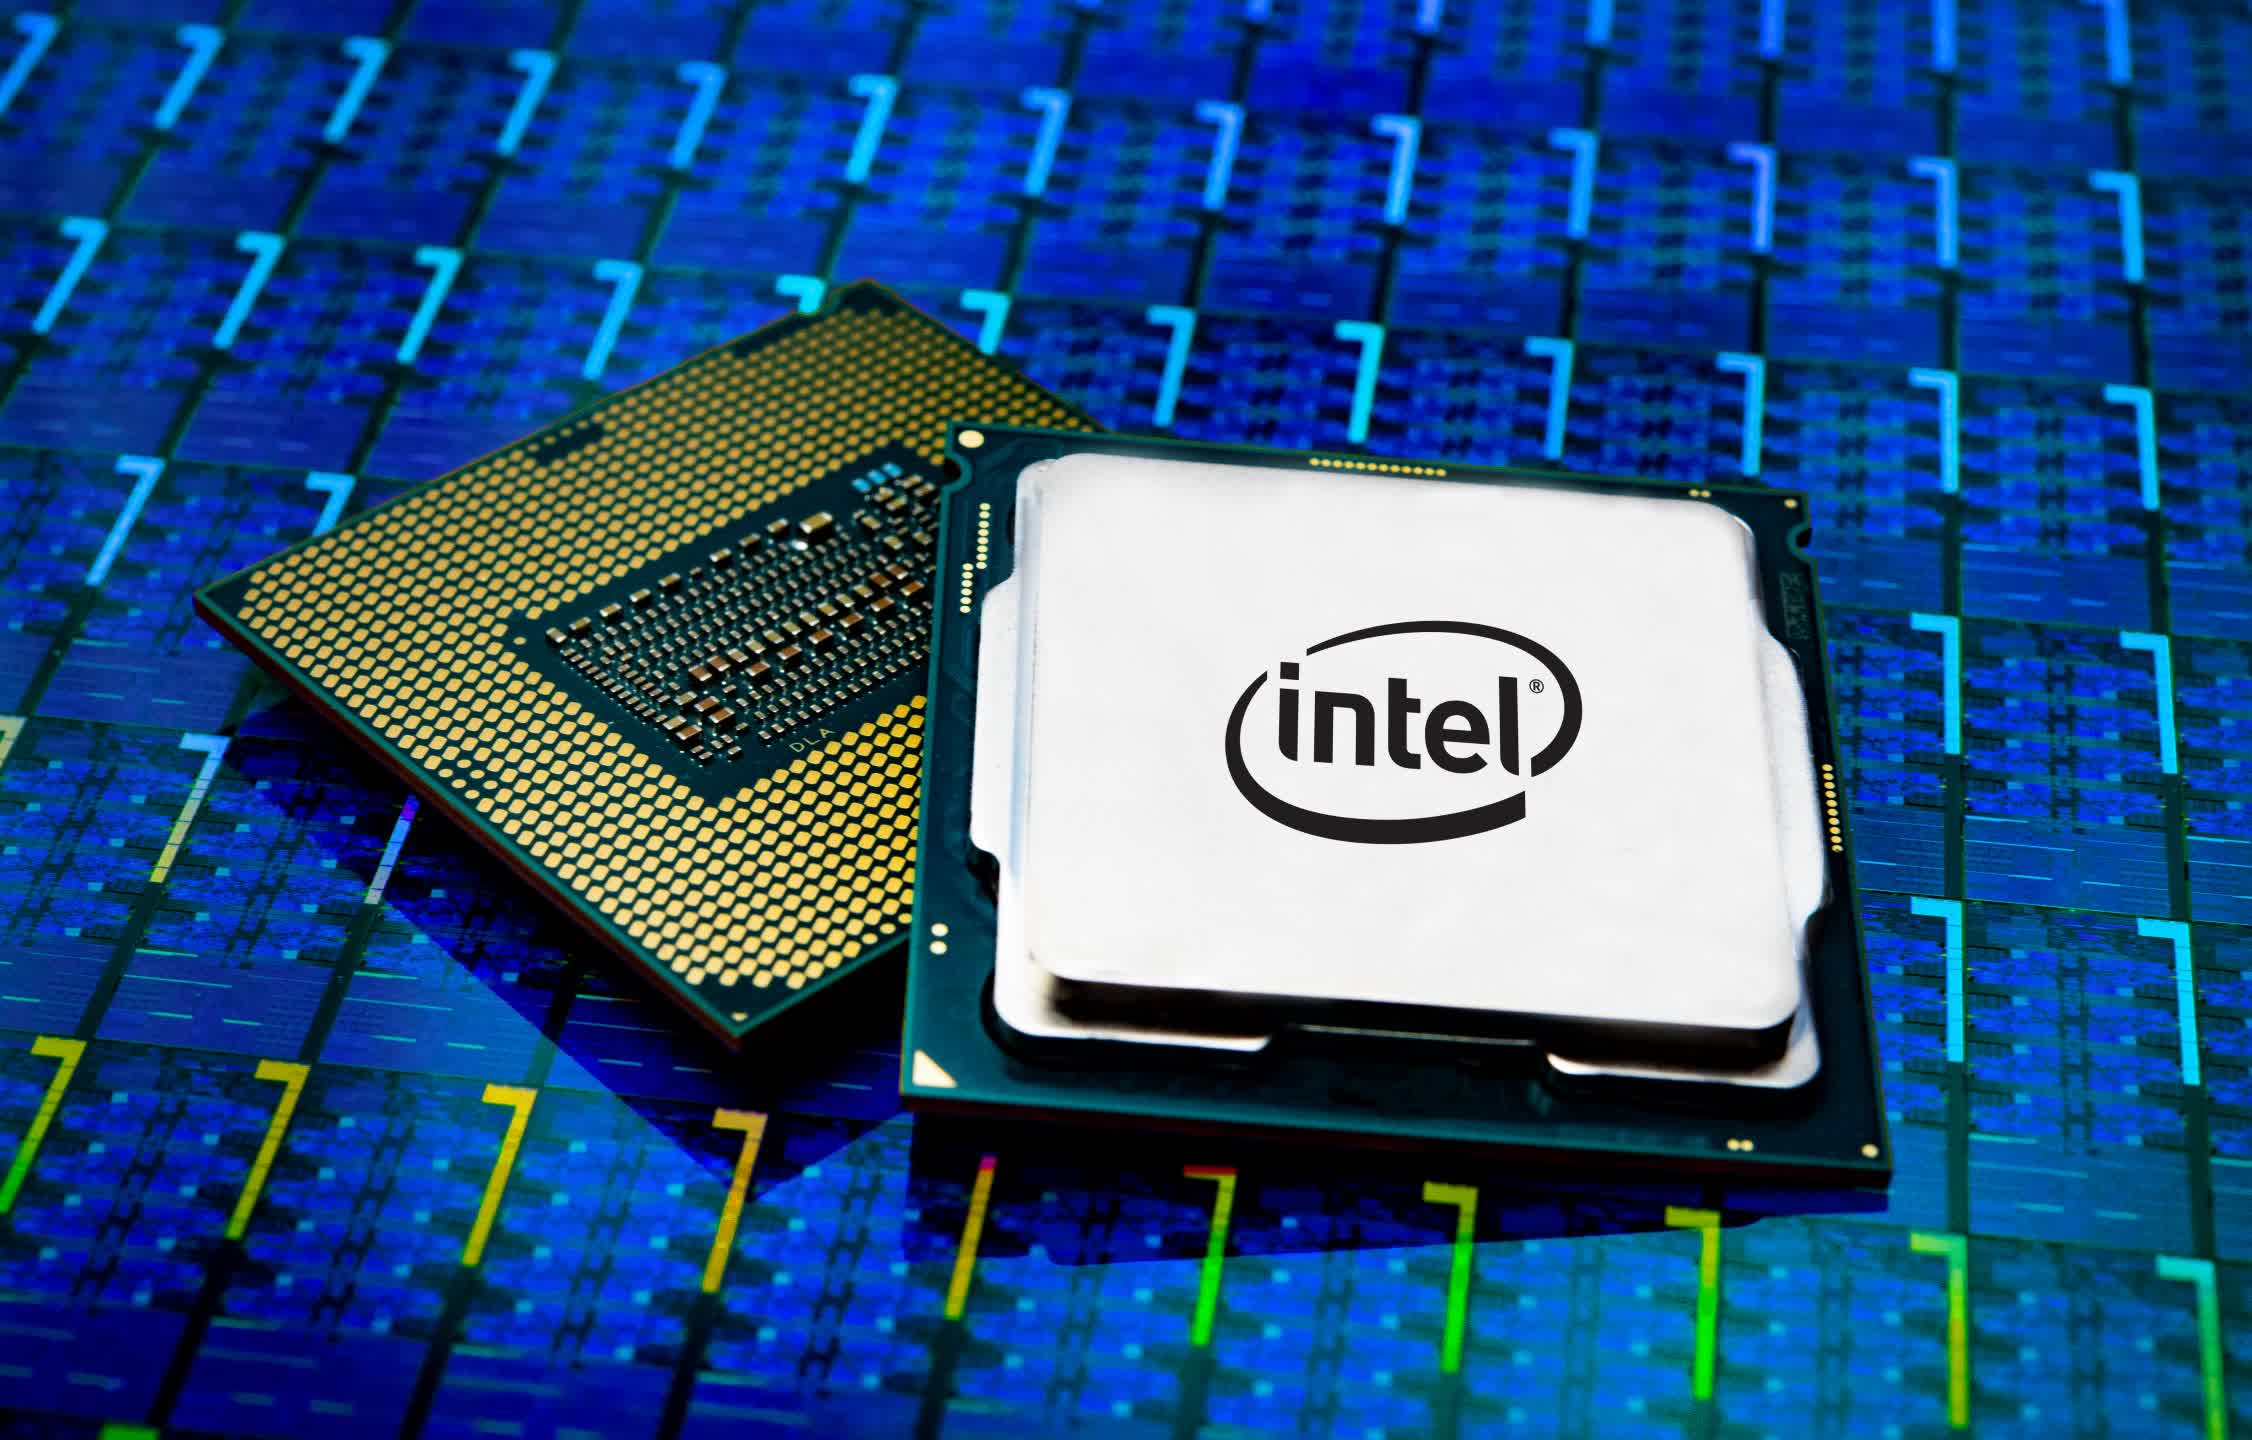 After deprecation, Intel's SGX technology is still messing with users' security